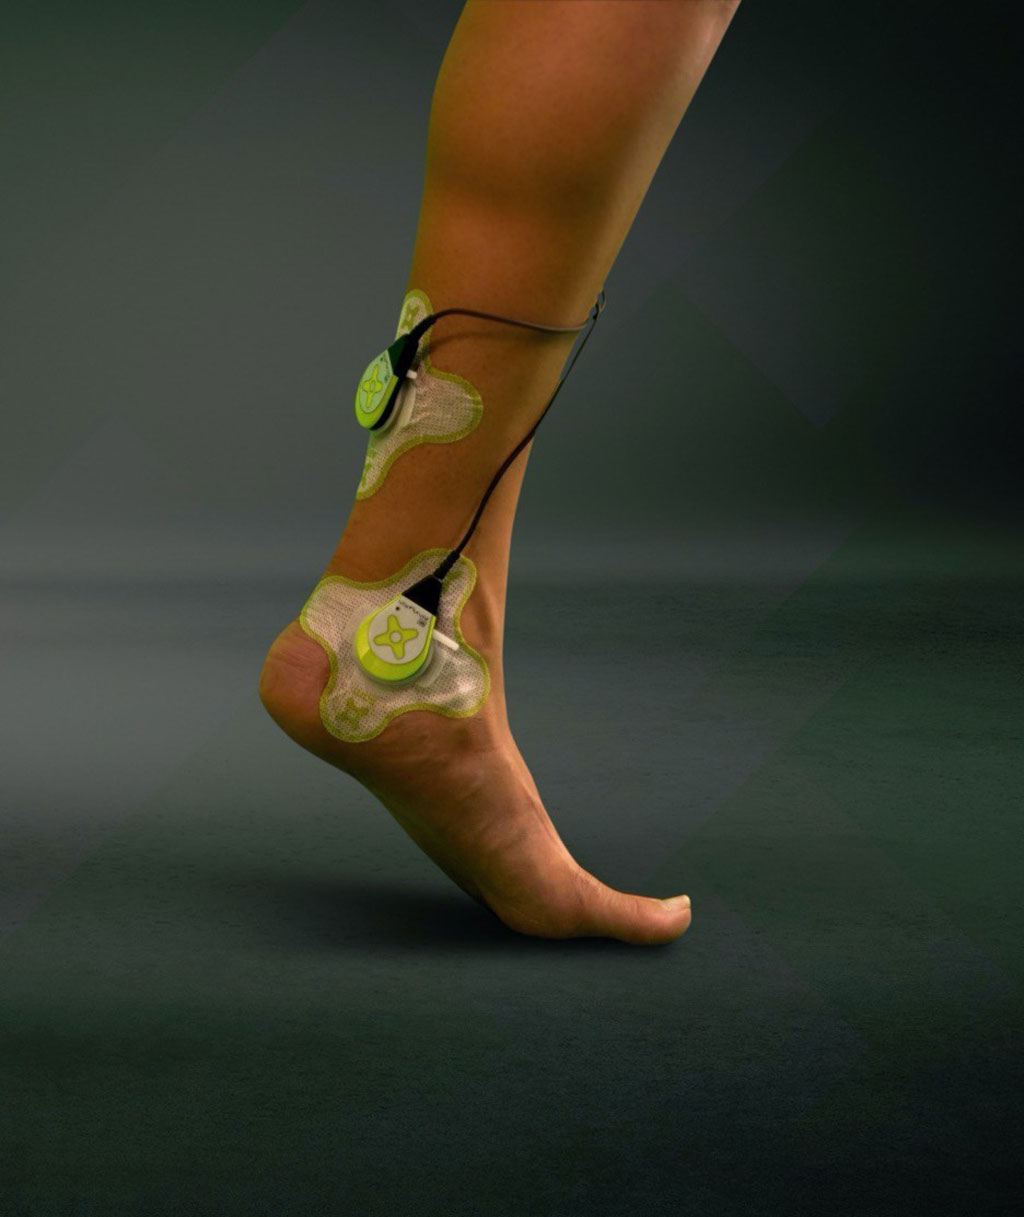 Image: The sam applied to Achilles tendon injury to stimulate collagen-matrix rebuilding (Photo courtesy of ZetrOZ Systems)